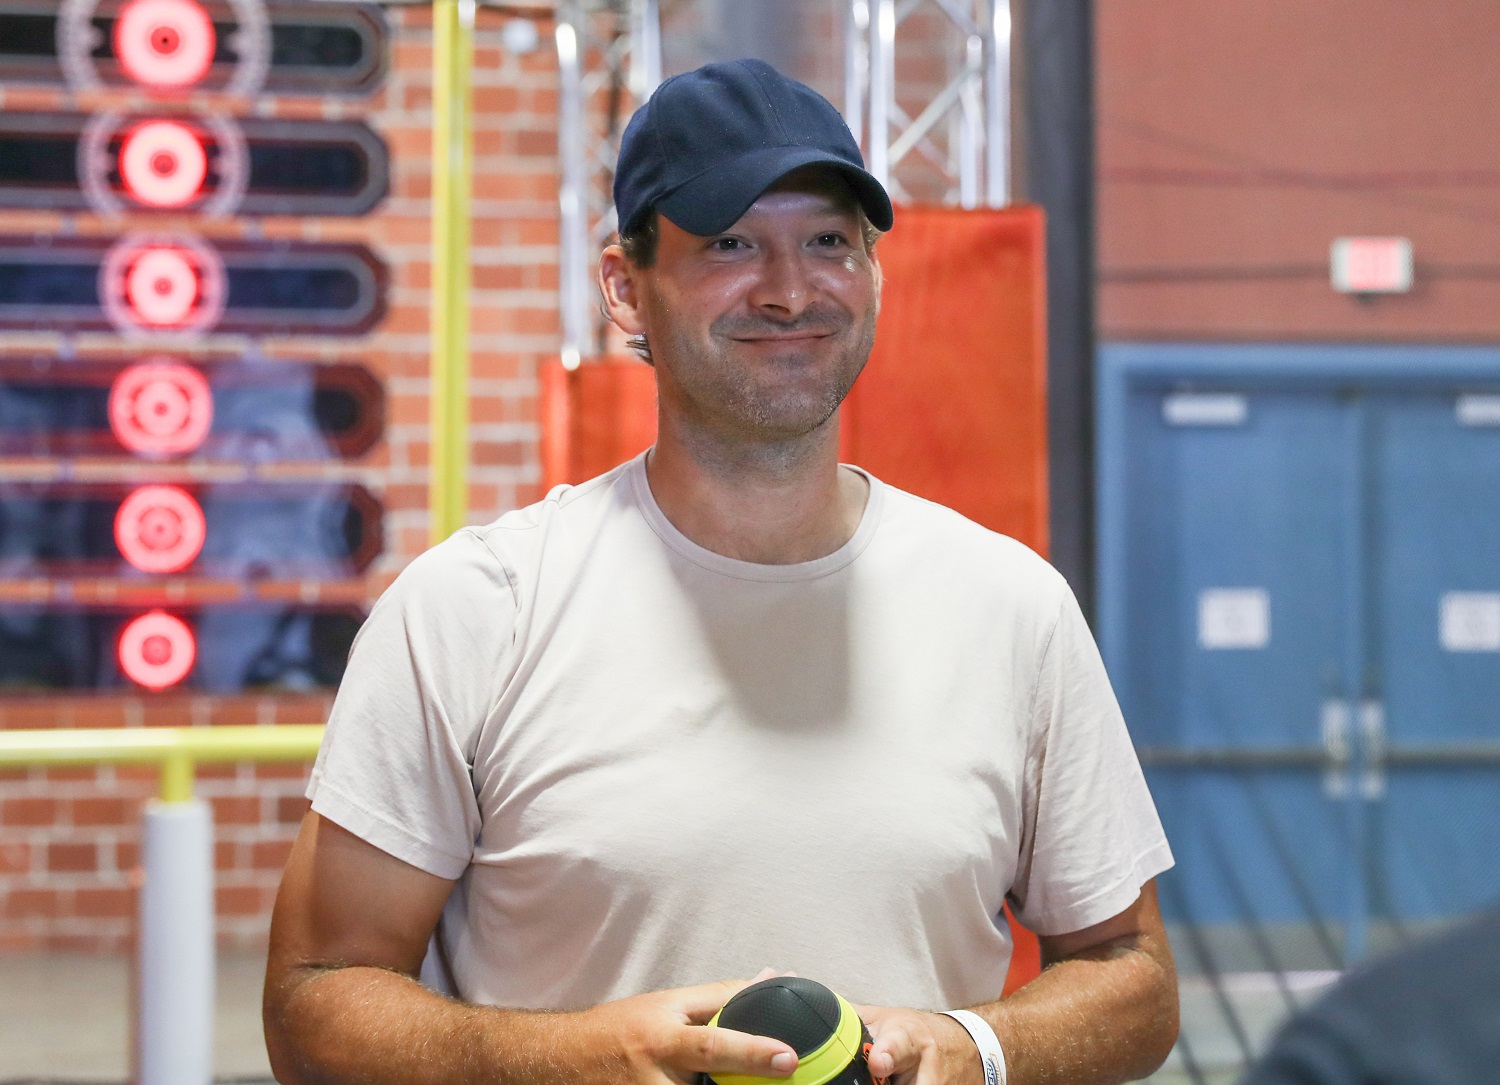 Tony Romo appears at Nerf Challenge on June 15, 2021, in Dallas.